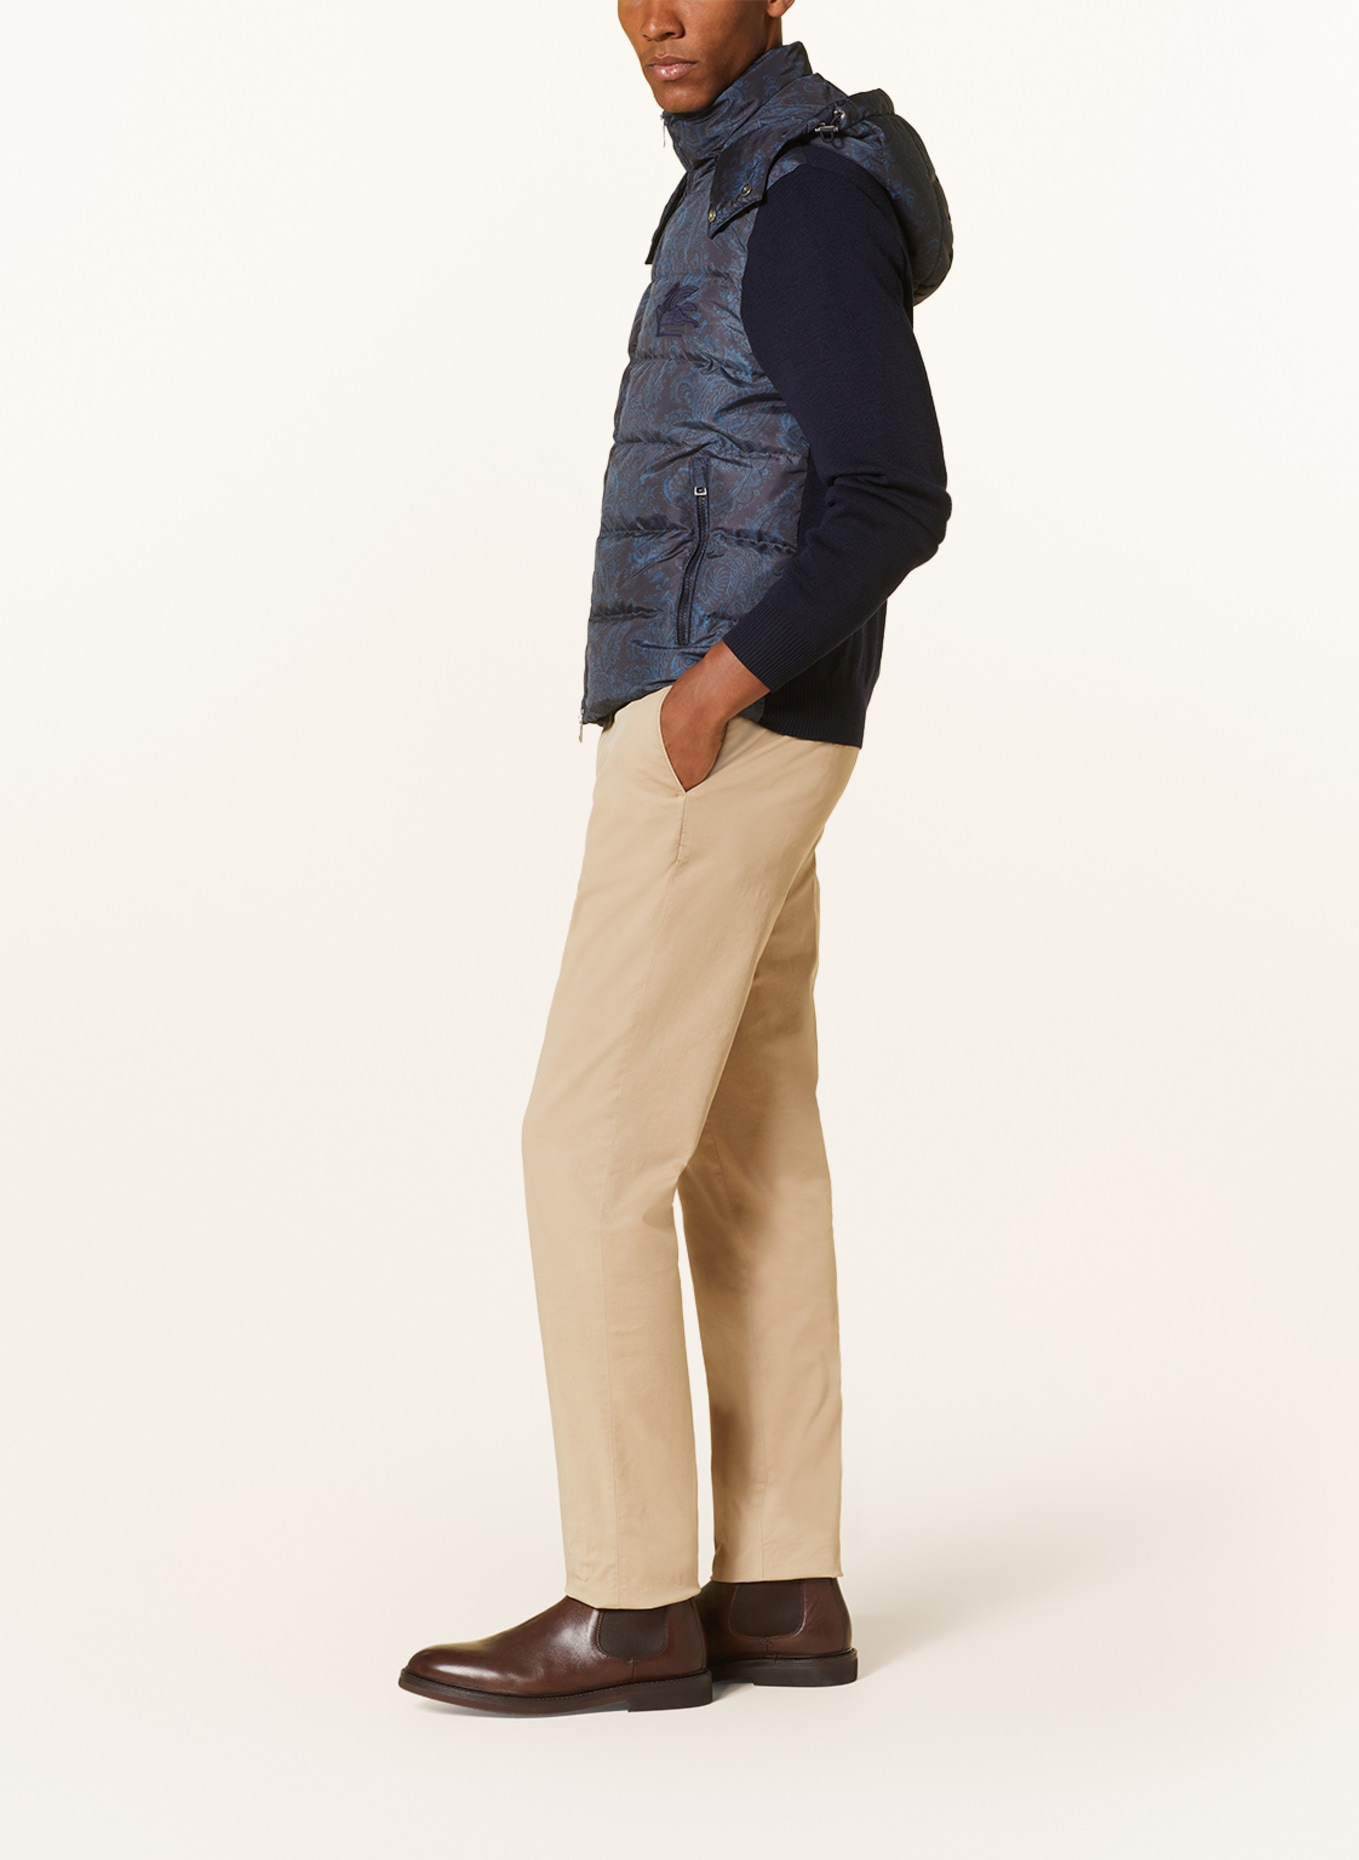 ETRO Quilted jacket in mixed materials with detachable hood, Color: DARK BLUE/ LIGHT BLUE/ GRAY (Image 4)